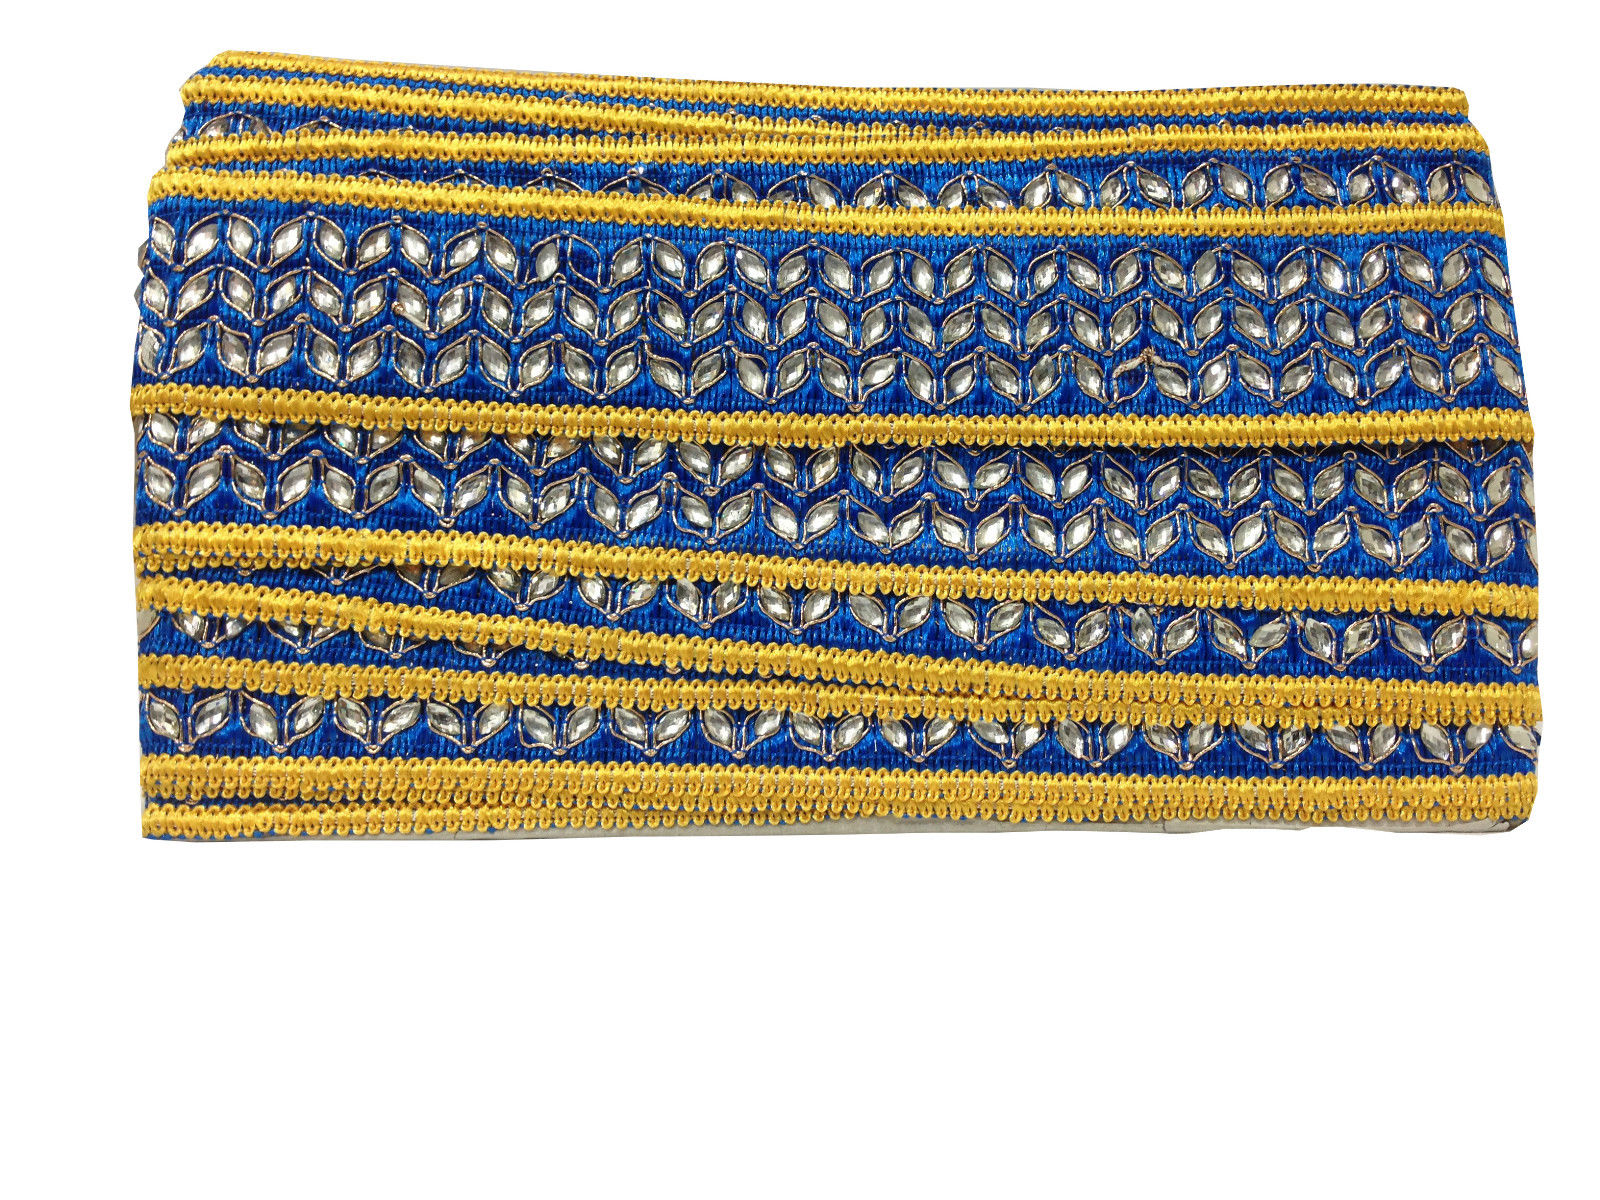 fabric trim wholesale trimming in fashion Blue Cobalt Blue, Yellow, Gold Embroidery n Stone Polyester Less than 2 inch